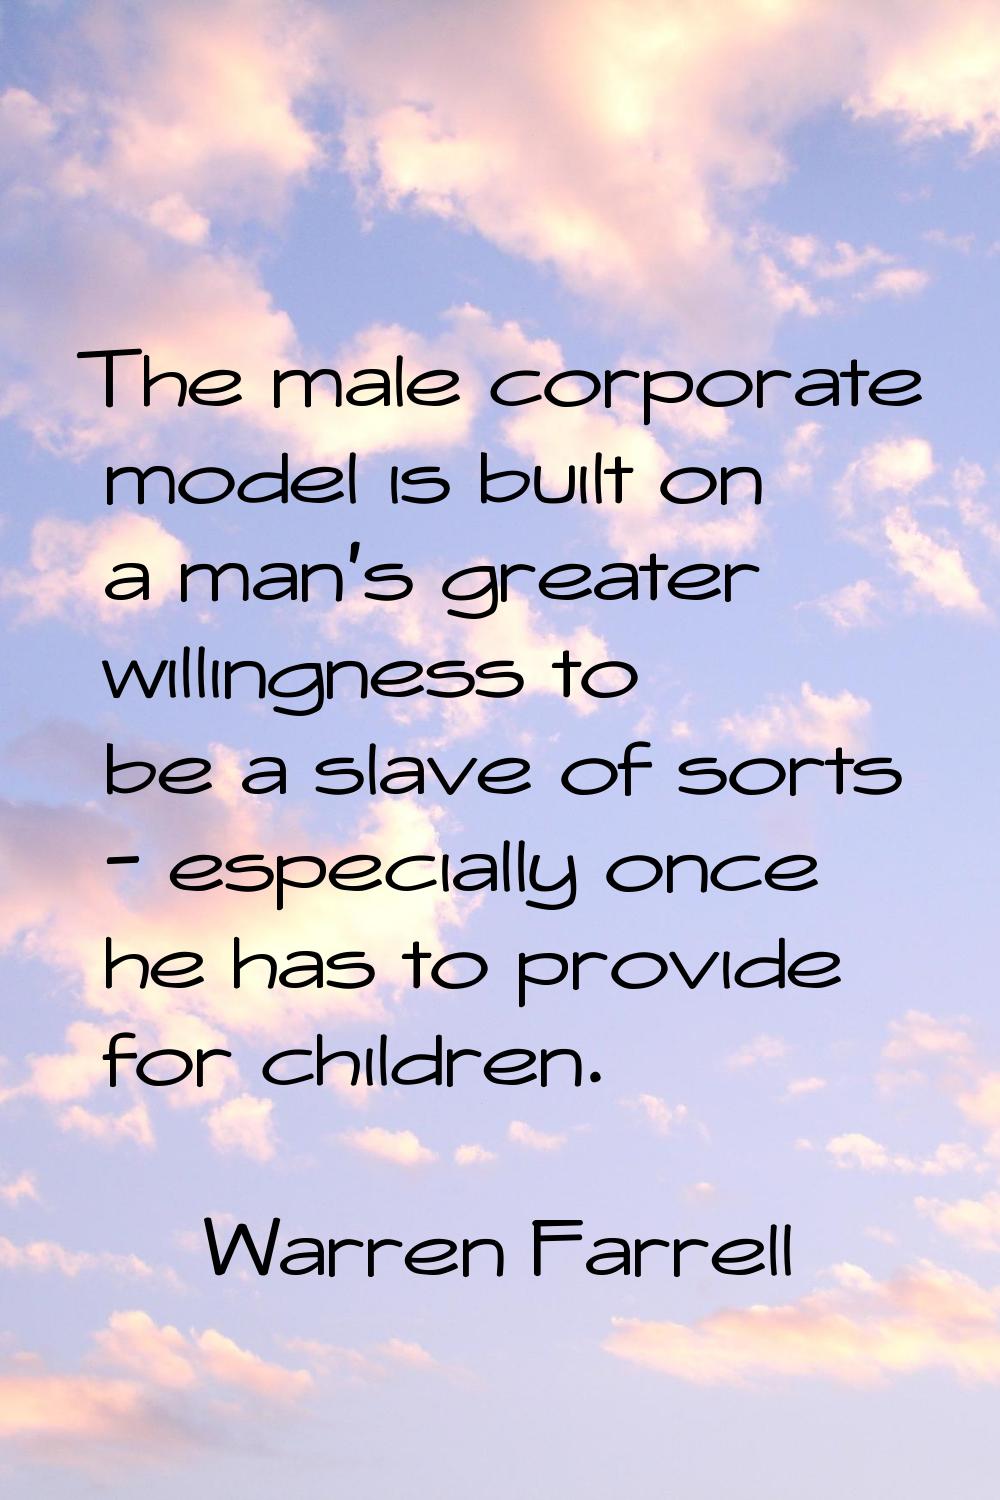 The male corporate model is built on a man's greater willingness to be a slave of sorts - especiall